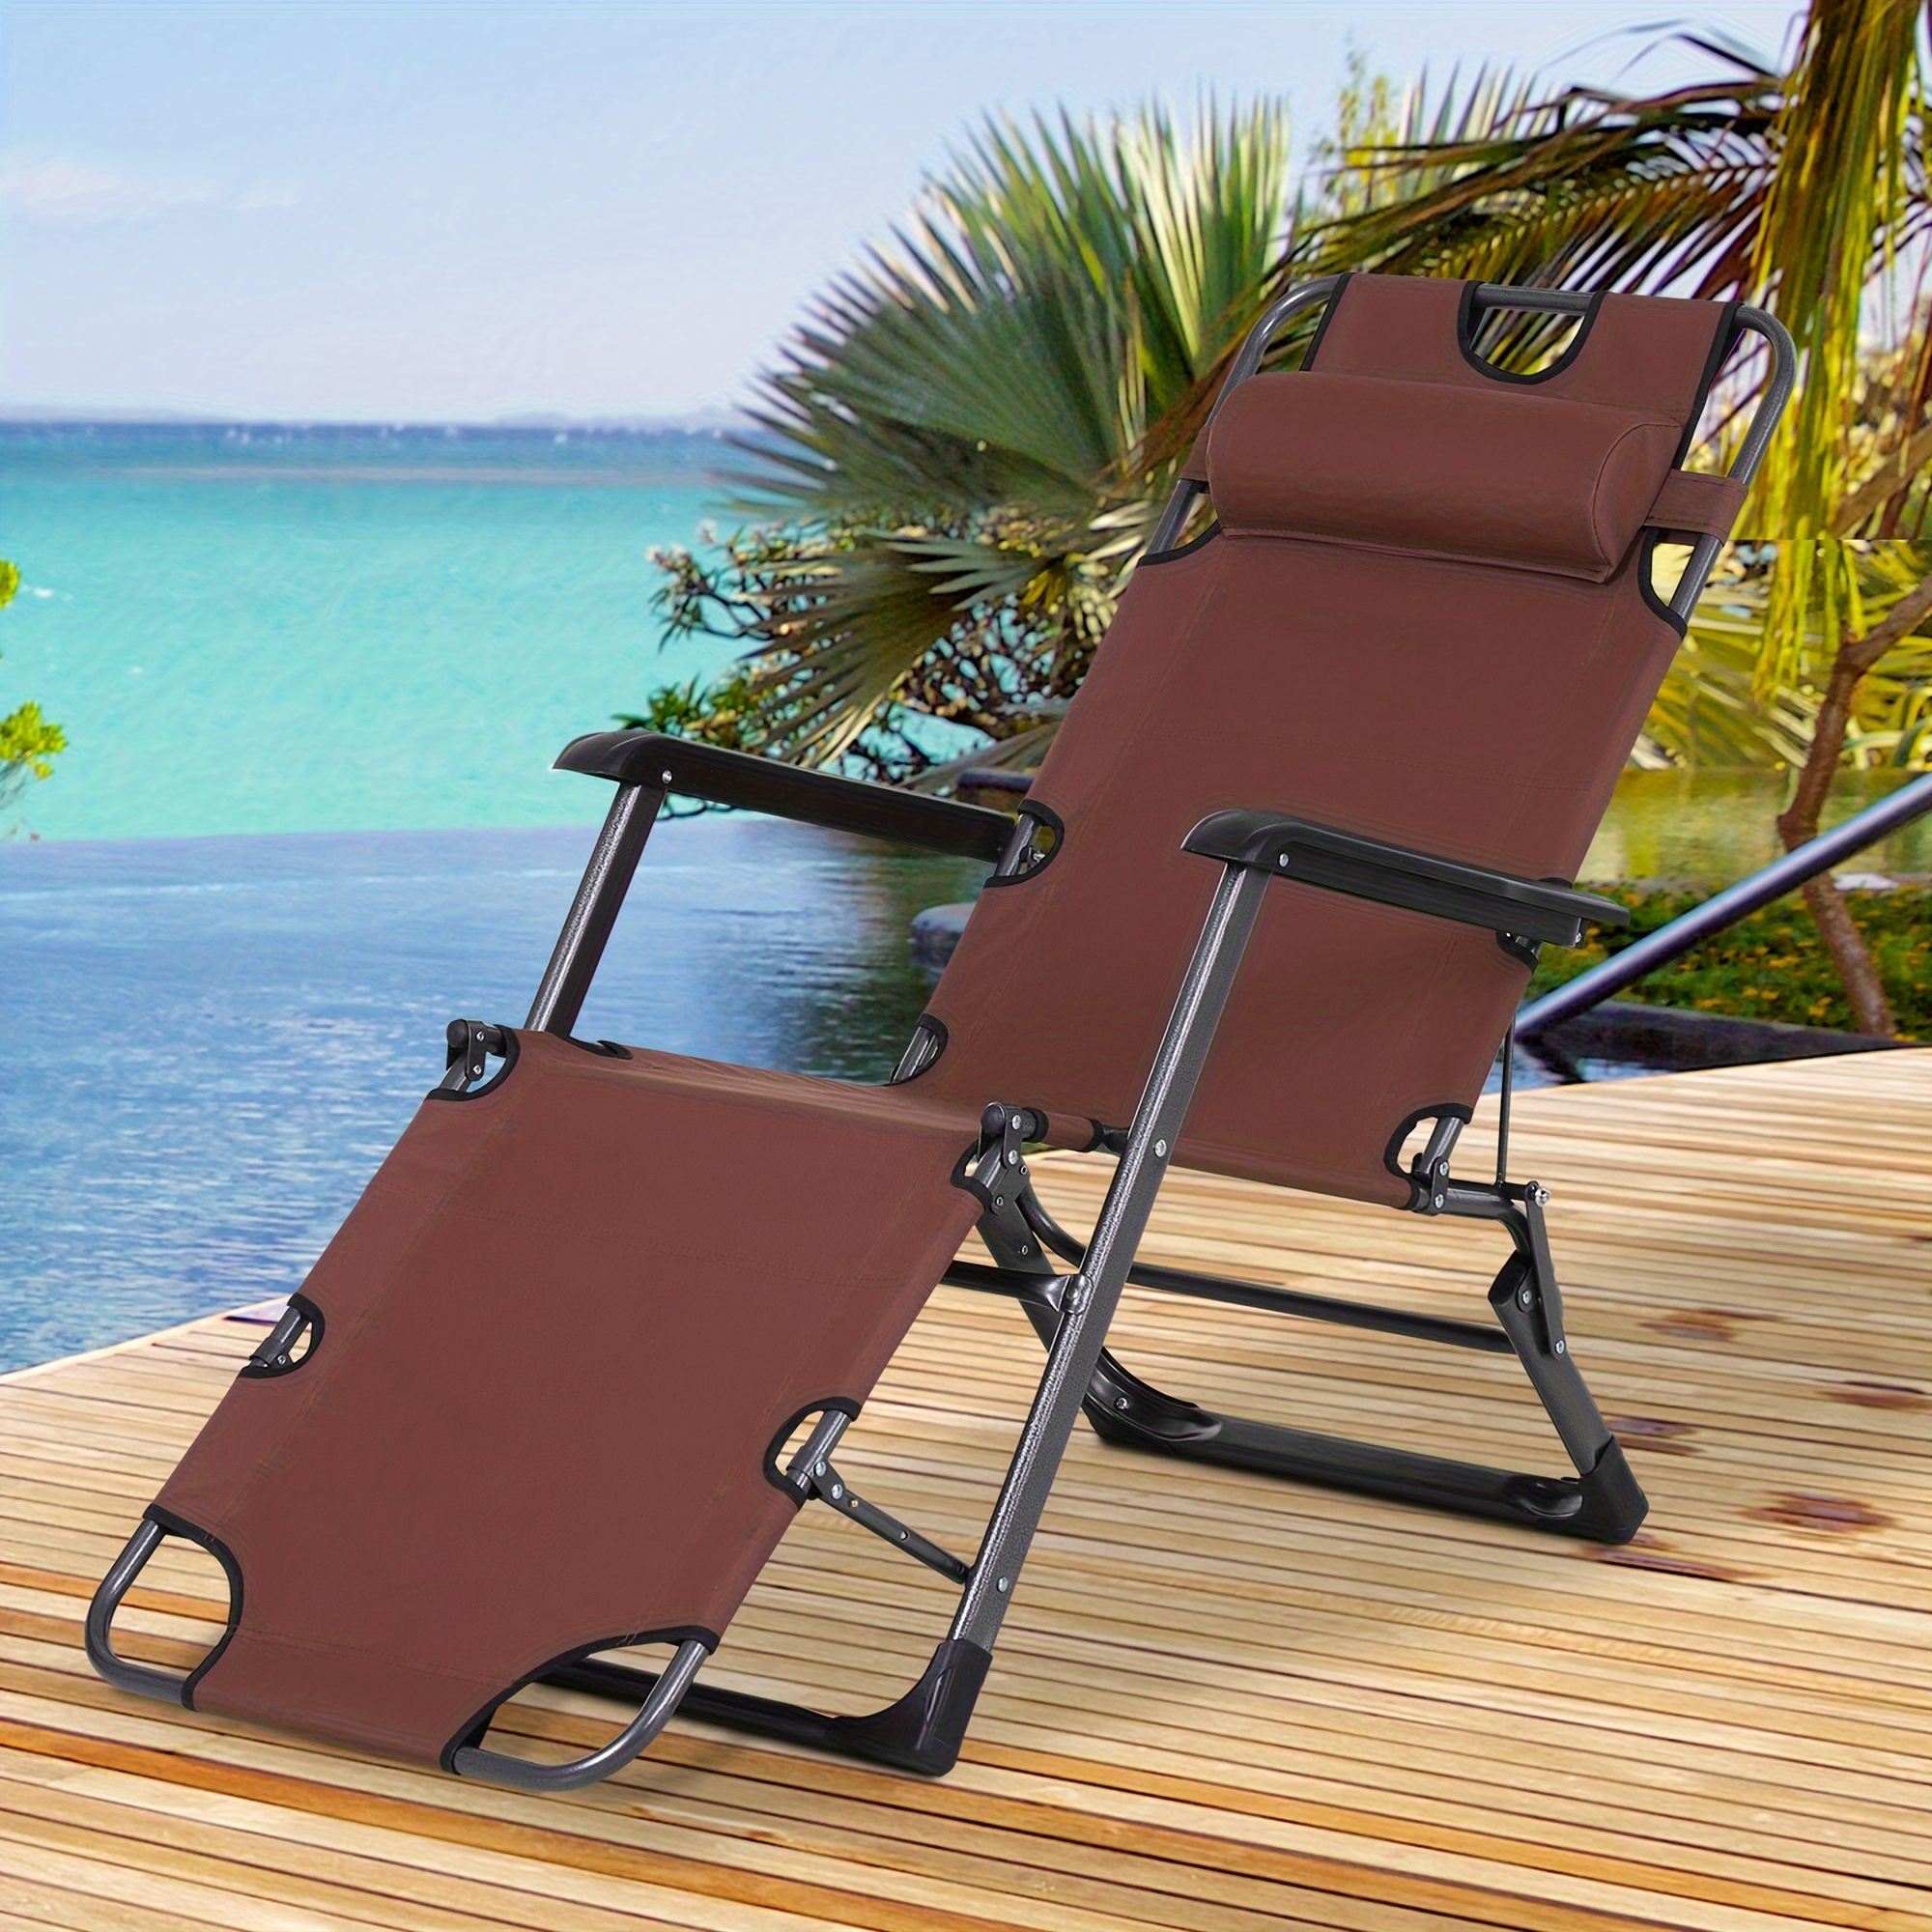 

Outsunny Folding Chaise Lounge Chair For Outside, 2-in-1 Tanning Chair With , Adjustable Pool Chair For Beach, Patio, Lawn, Deck, Brown